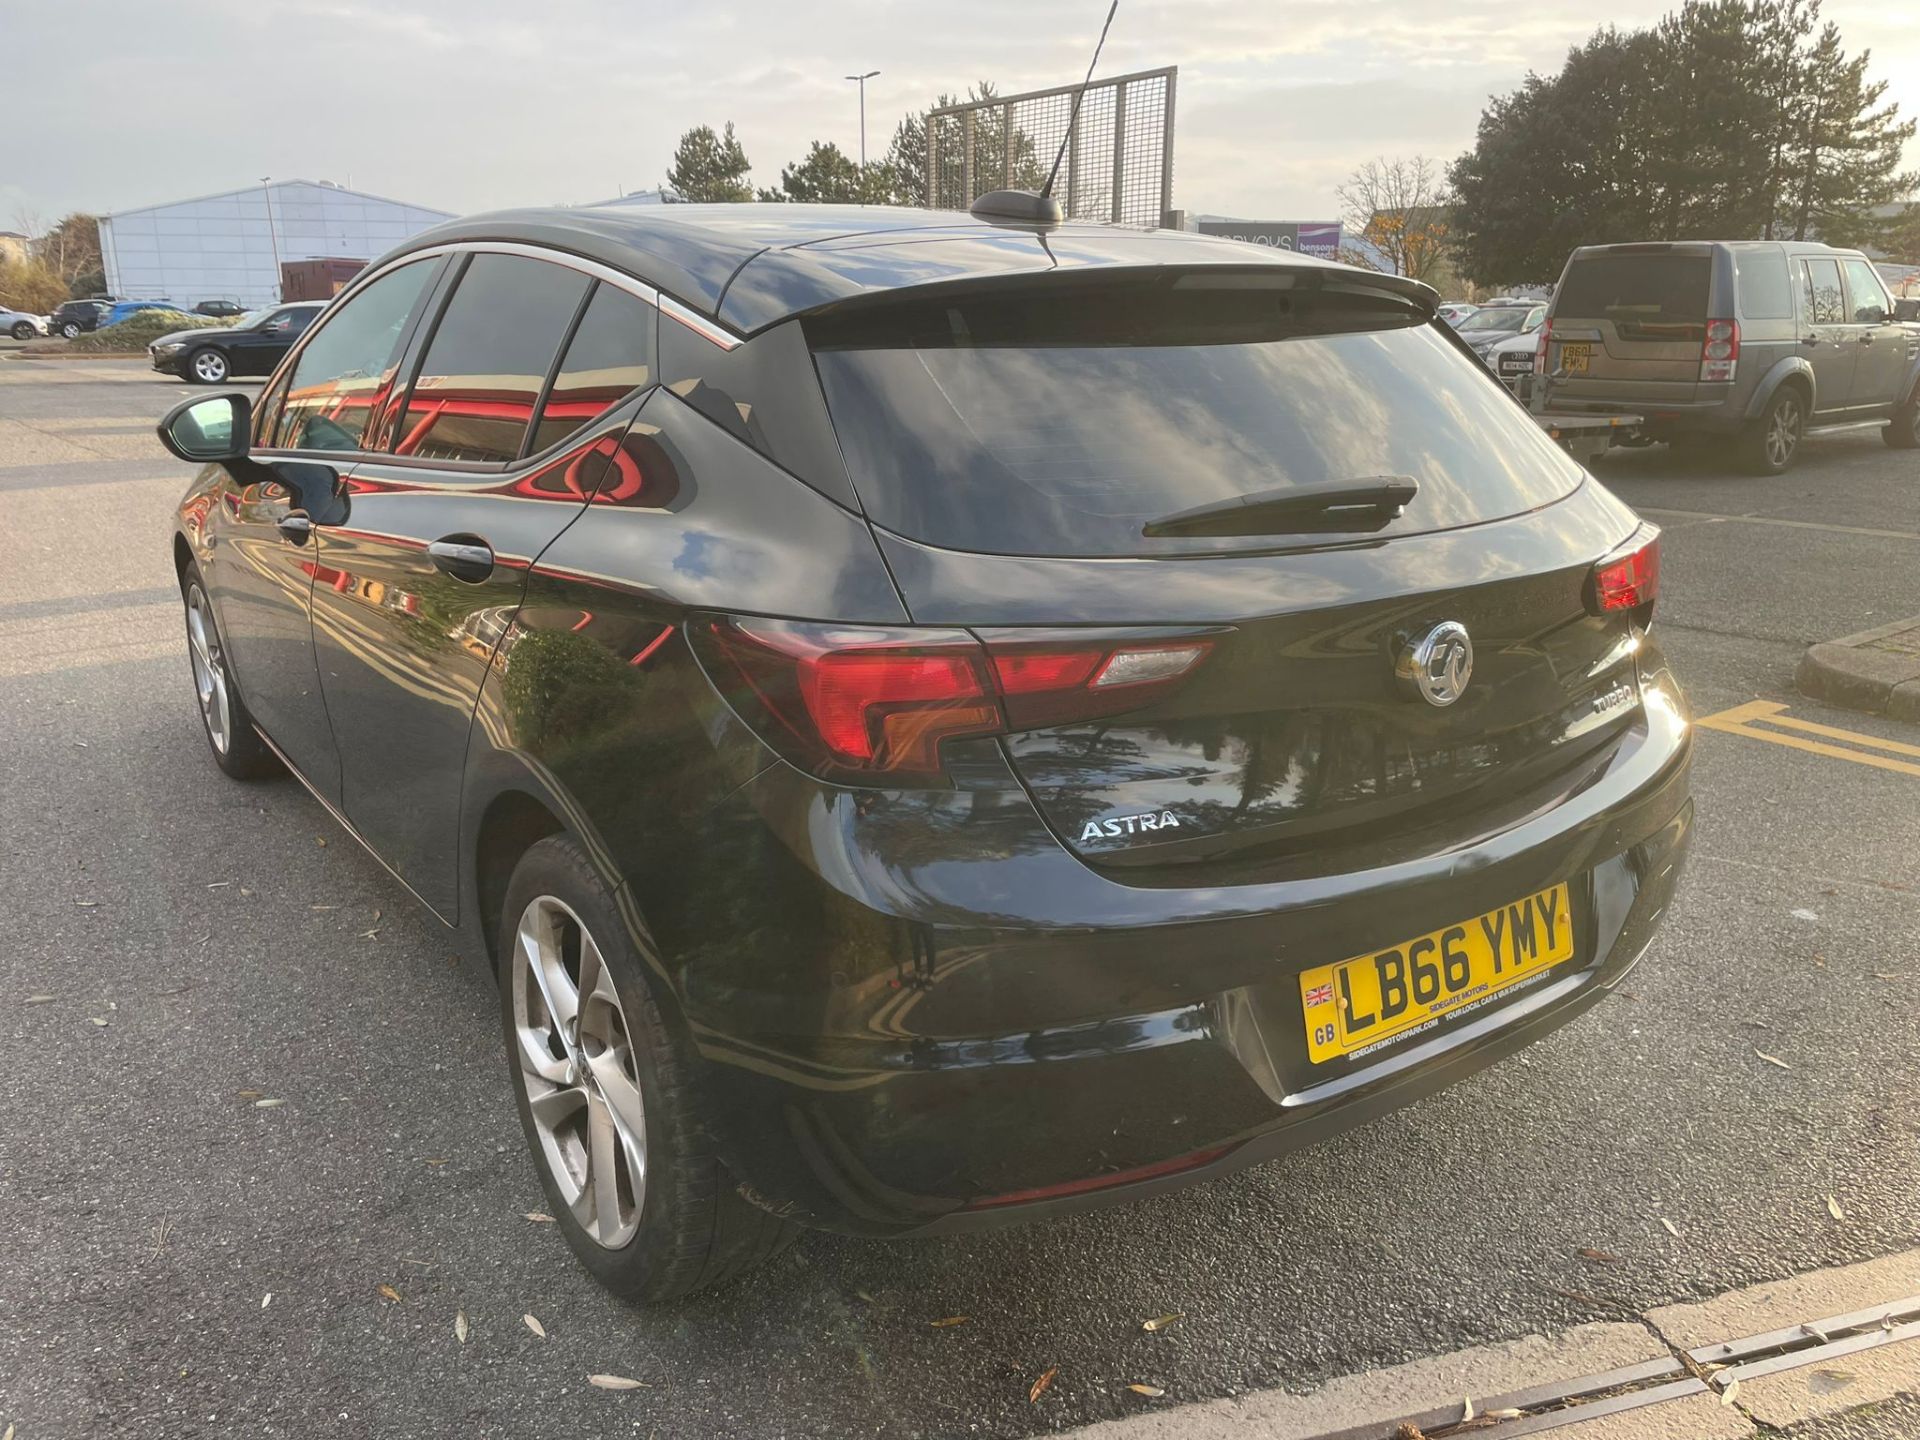 2016 Vauxhall Astra SRI 1.4T (150PS) Manual 6 speed in Black Hatchback - LB66 YMY - Image 4 of 17